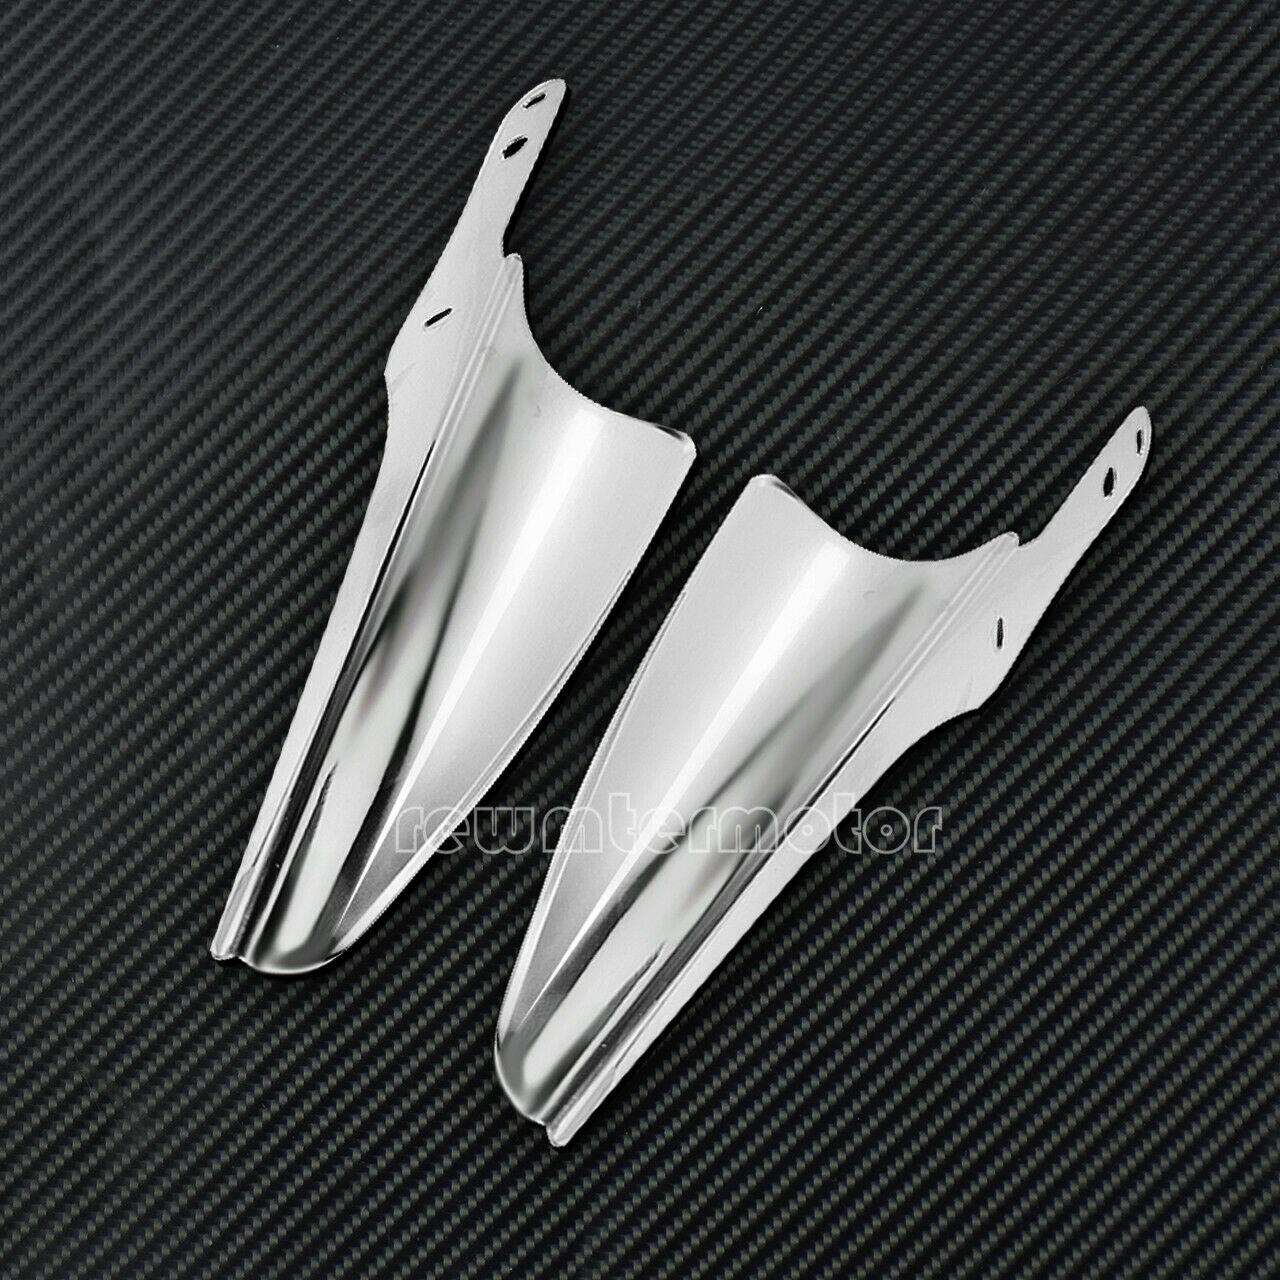 Chrome Front Fork Mount Wind Deflectors Fit For Harley Road King 95-2020 FLHRSE - Moto Life Products